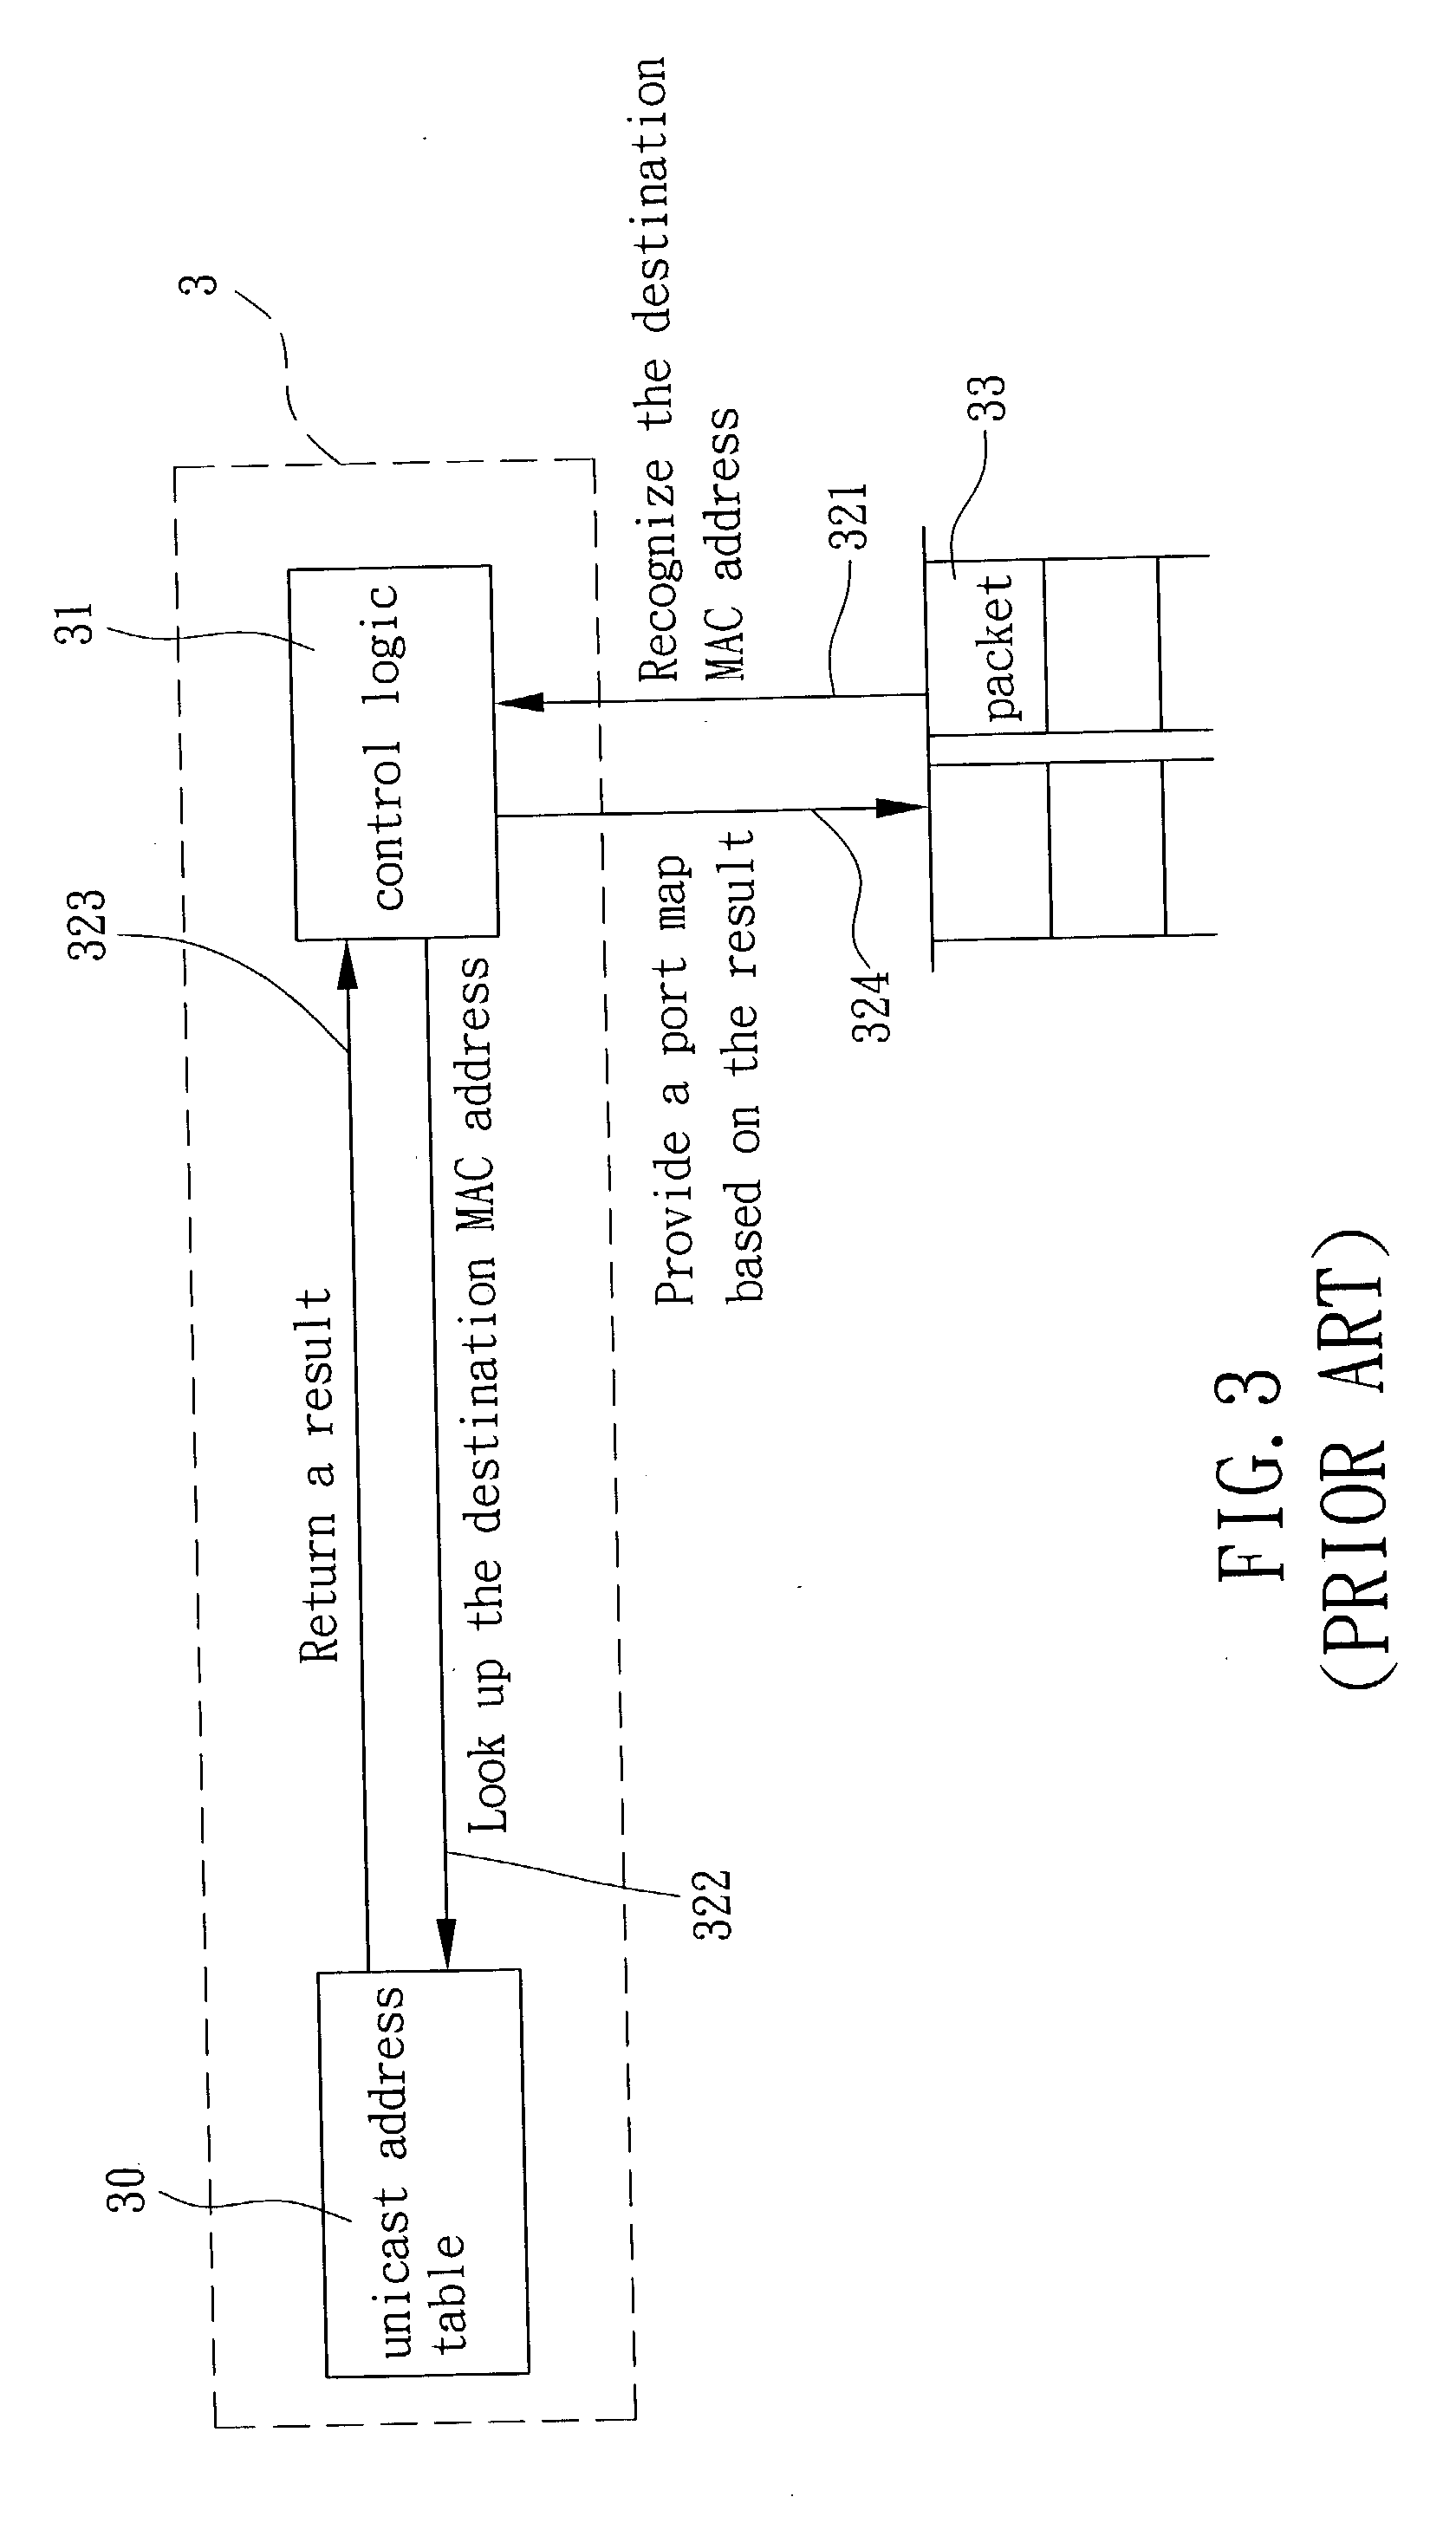 Method and apparatus for packet forwarding in a switch controller